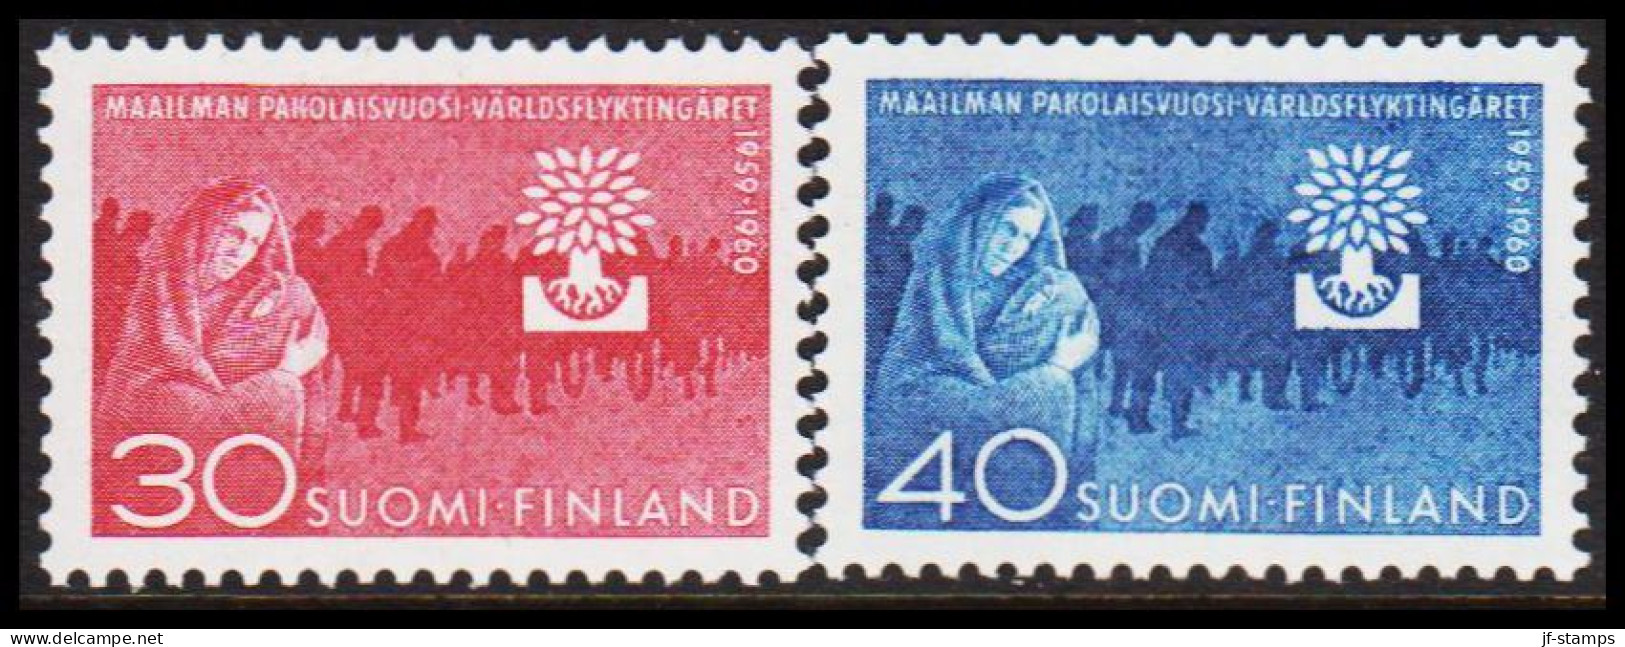 1960. FINLAND. World Refugfee Year Complete Set, NEVER HINGED. (Michel 517-518) - JF540567 - Nuevos